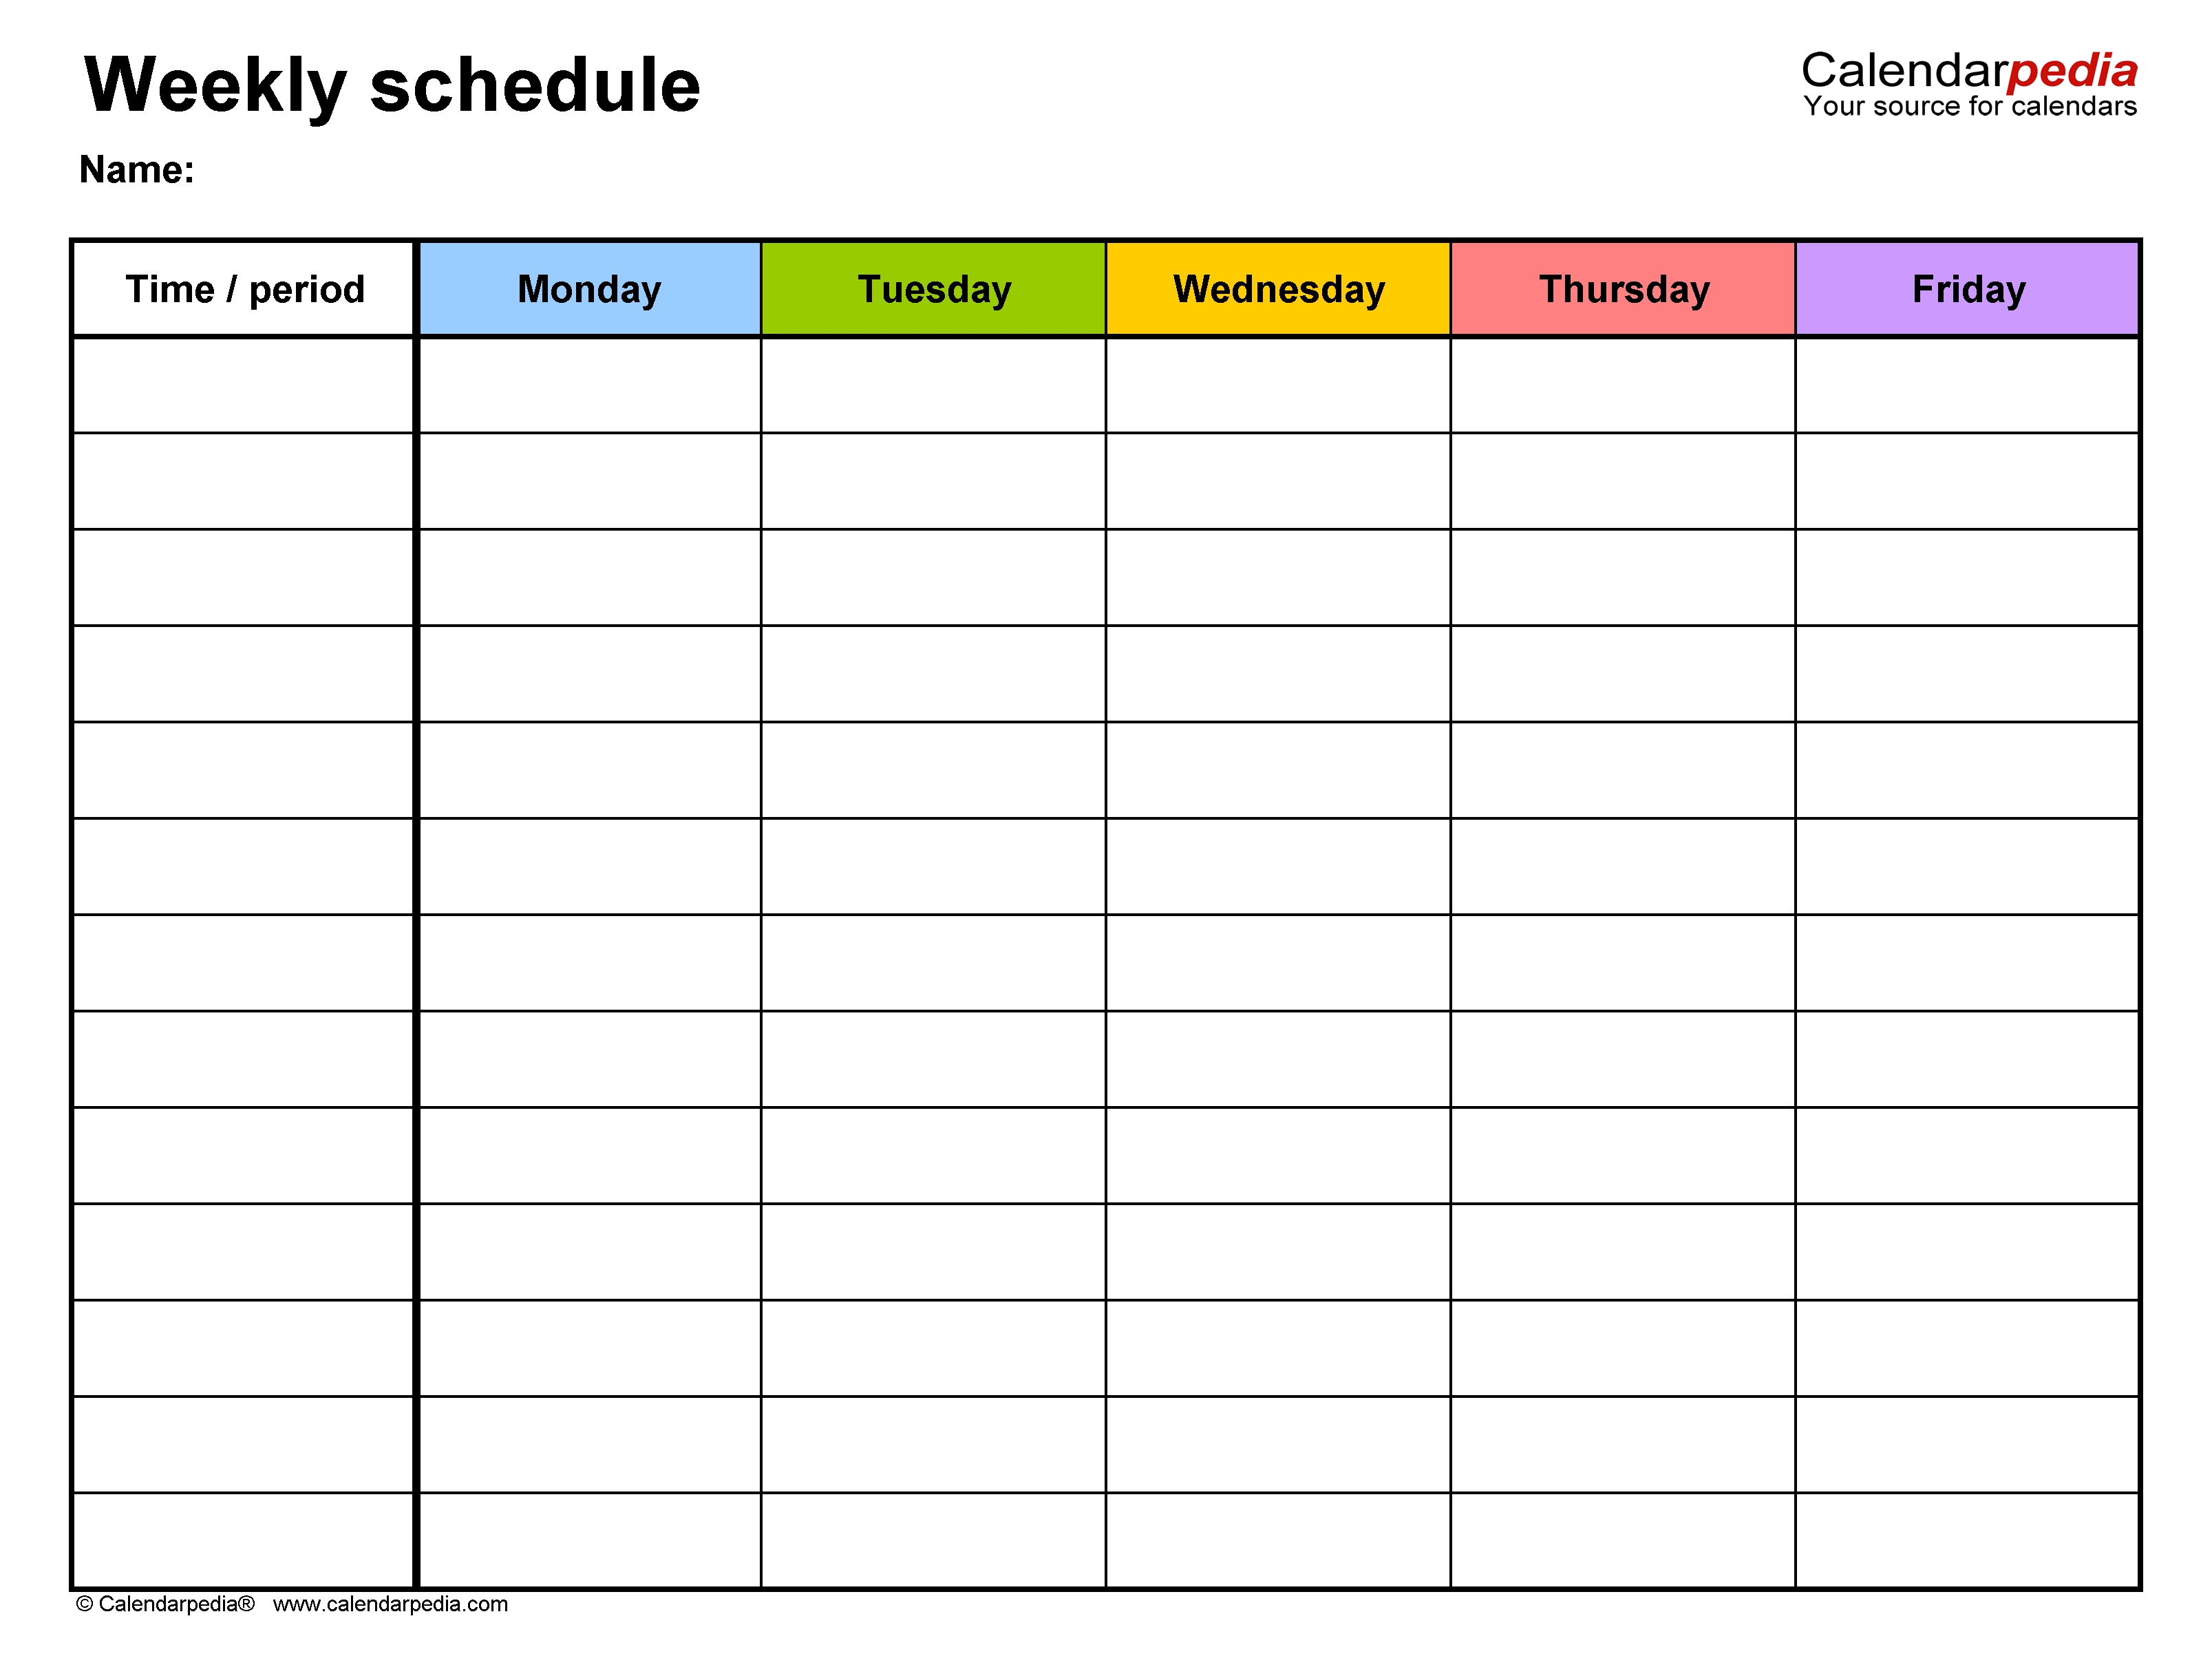 Free Weekly Schedule Templates For Word - 18 Templates Calendar Template 5 Day Week